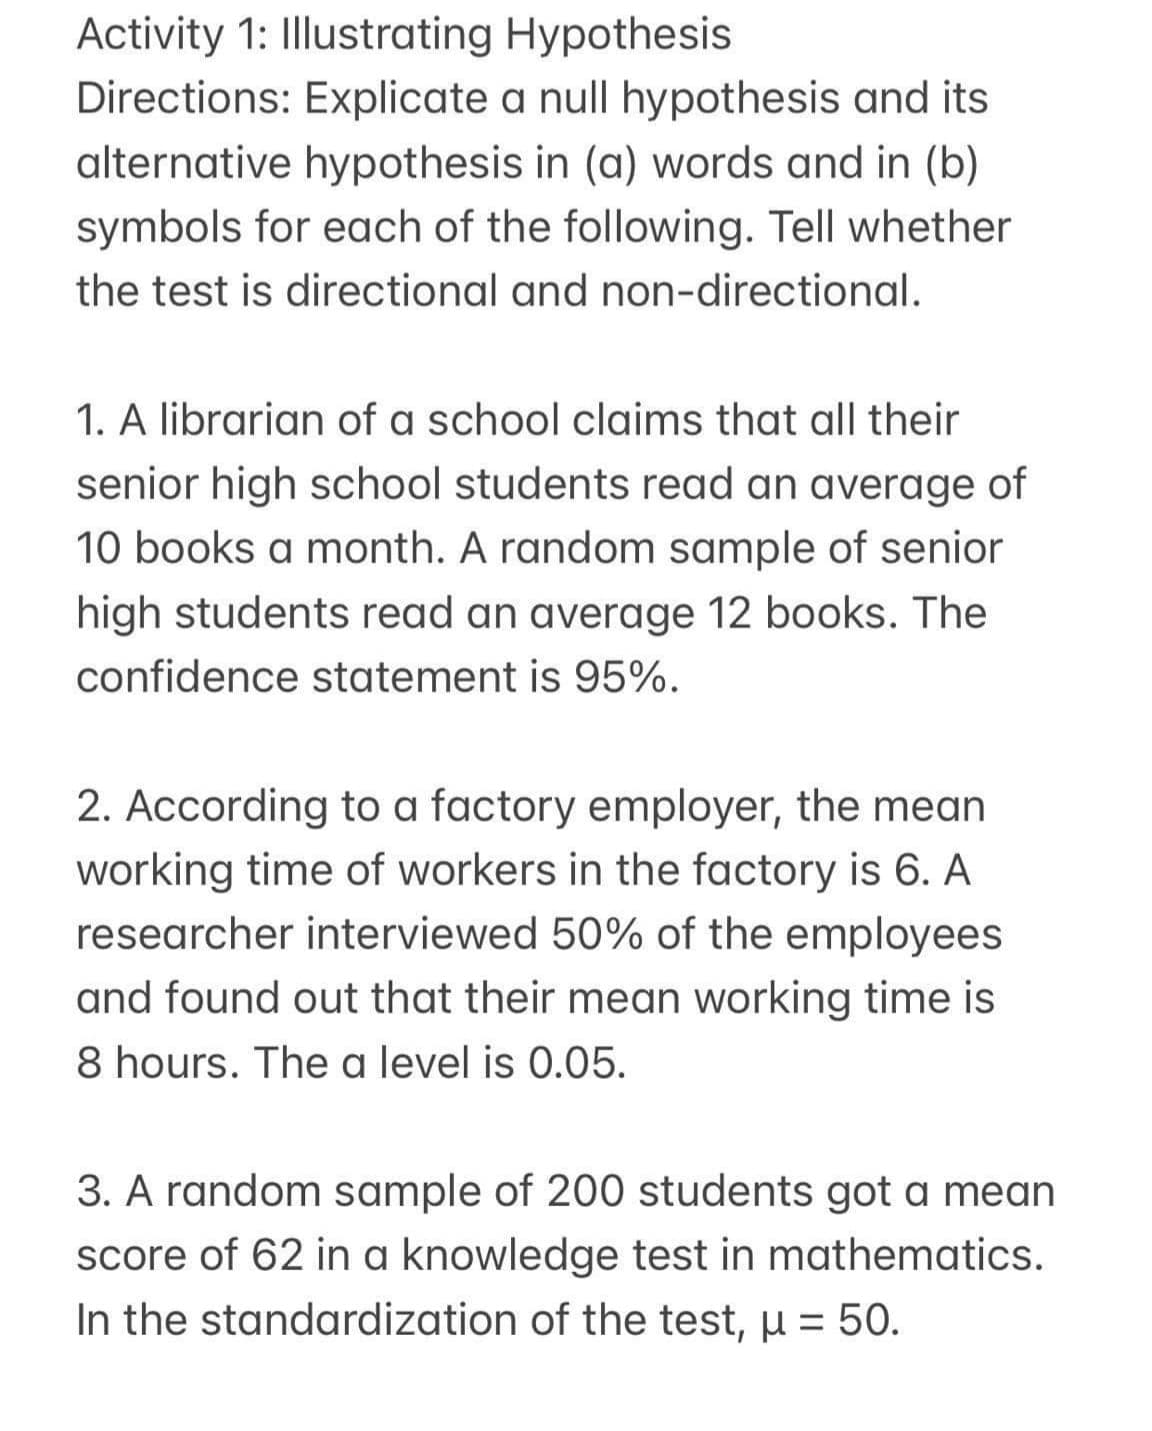 Activity 1: Illustrating Hypothesis
Directions: Explicate a null hypothesis and its
alternative hypothesis in (a) words and in (b)
symbols for each of the following. Tell whether
the test is directional and non-directional.
1. A librarian of a school claims that all their
senior high school students read an average of
10 books a month. A random sample of senior
high students read an average 12 books. The
confidence statement is 95%.
2. According to a factory employer, the mean
working time of workers in the factory is 6. A
researcher interviewed 50% of the employees
and found out that their mean working time is
8 hours. The a level is 0.05.
3. A random sample of 200 students got a mean
score of 62 in a knowledge test in mathematics.
In the standardization of the test, µ = 50.